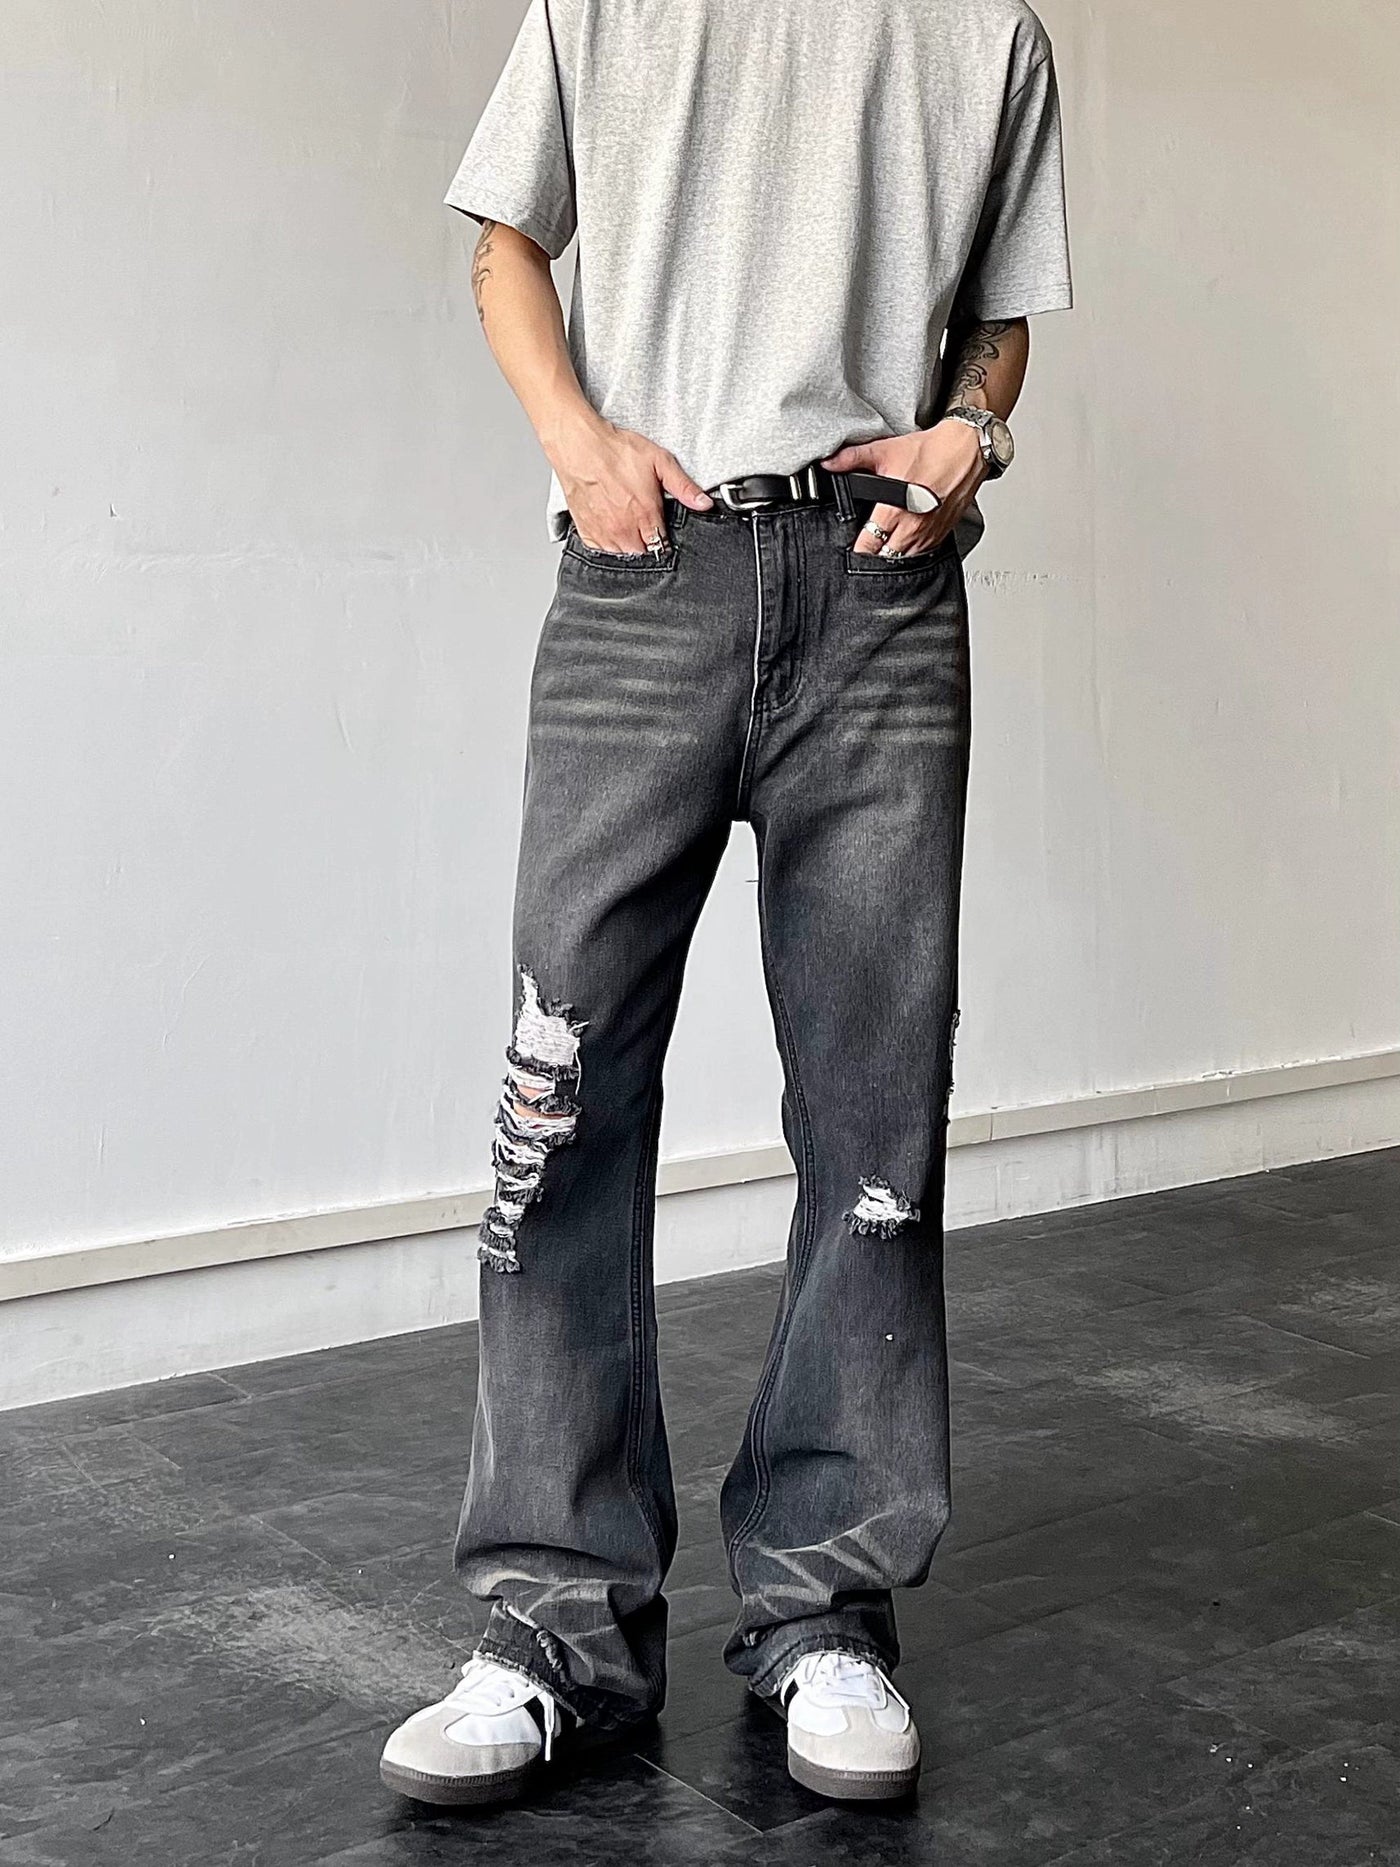 Cat Whisker Ripped Washed Jeans Korean Street Fashion Jeans By Blacklists Shop Online at OH Vault